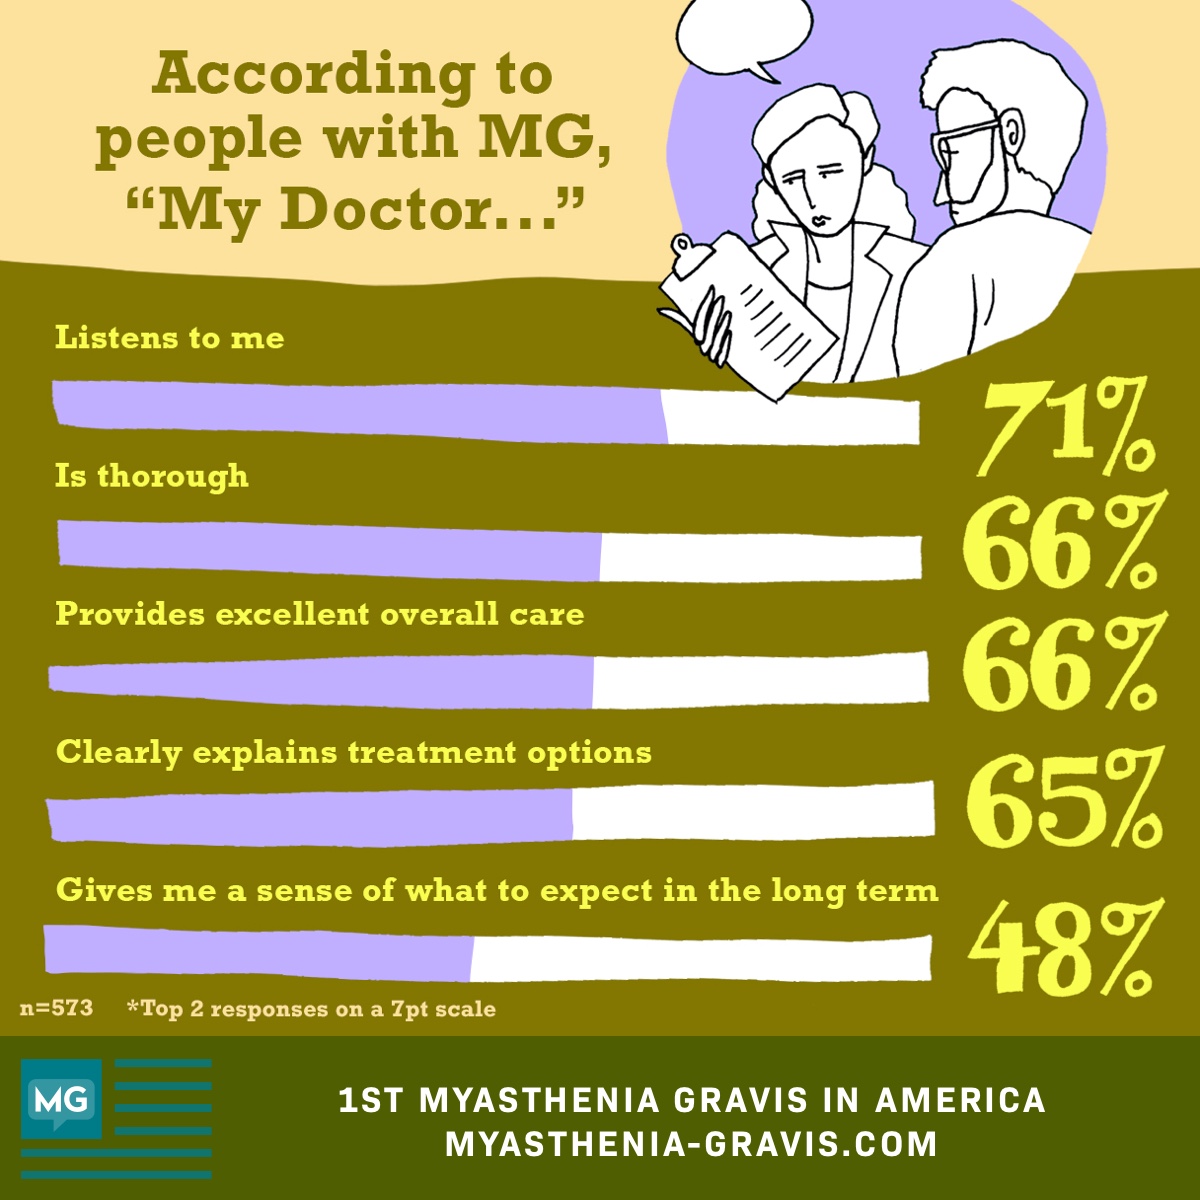 People with MG feel their doctor listens, is thorough, provides excellent care, clearly explains treatment options.